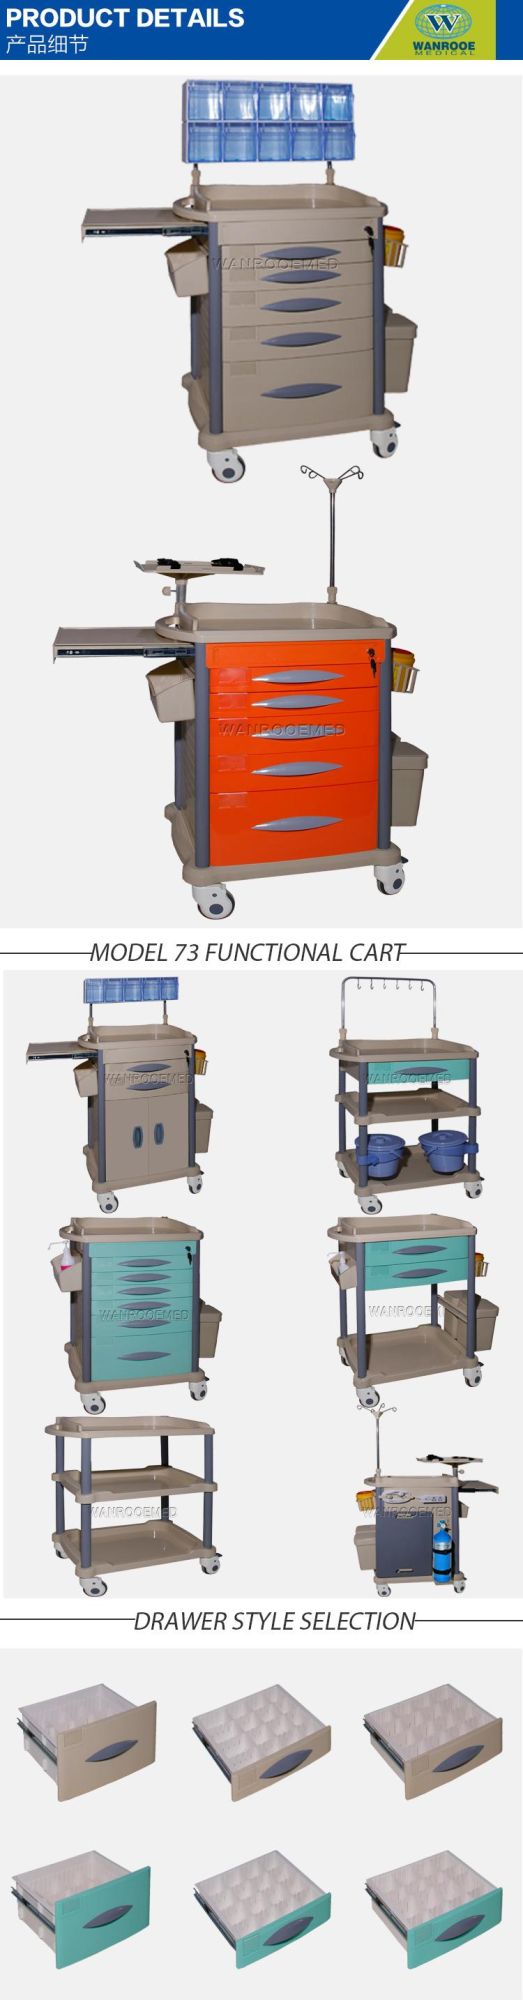 73 Series Hospital Equipment Medical ABS Mobile Anesthesia Drug Cart Trolley